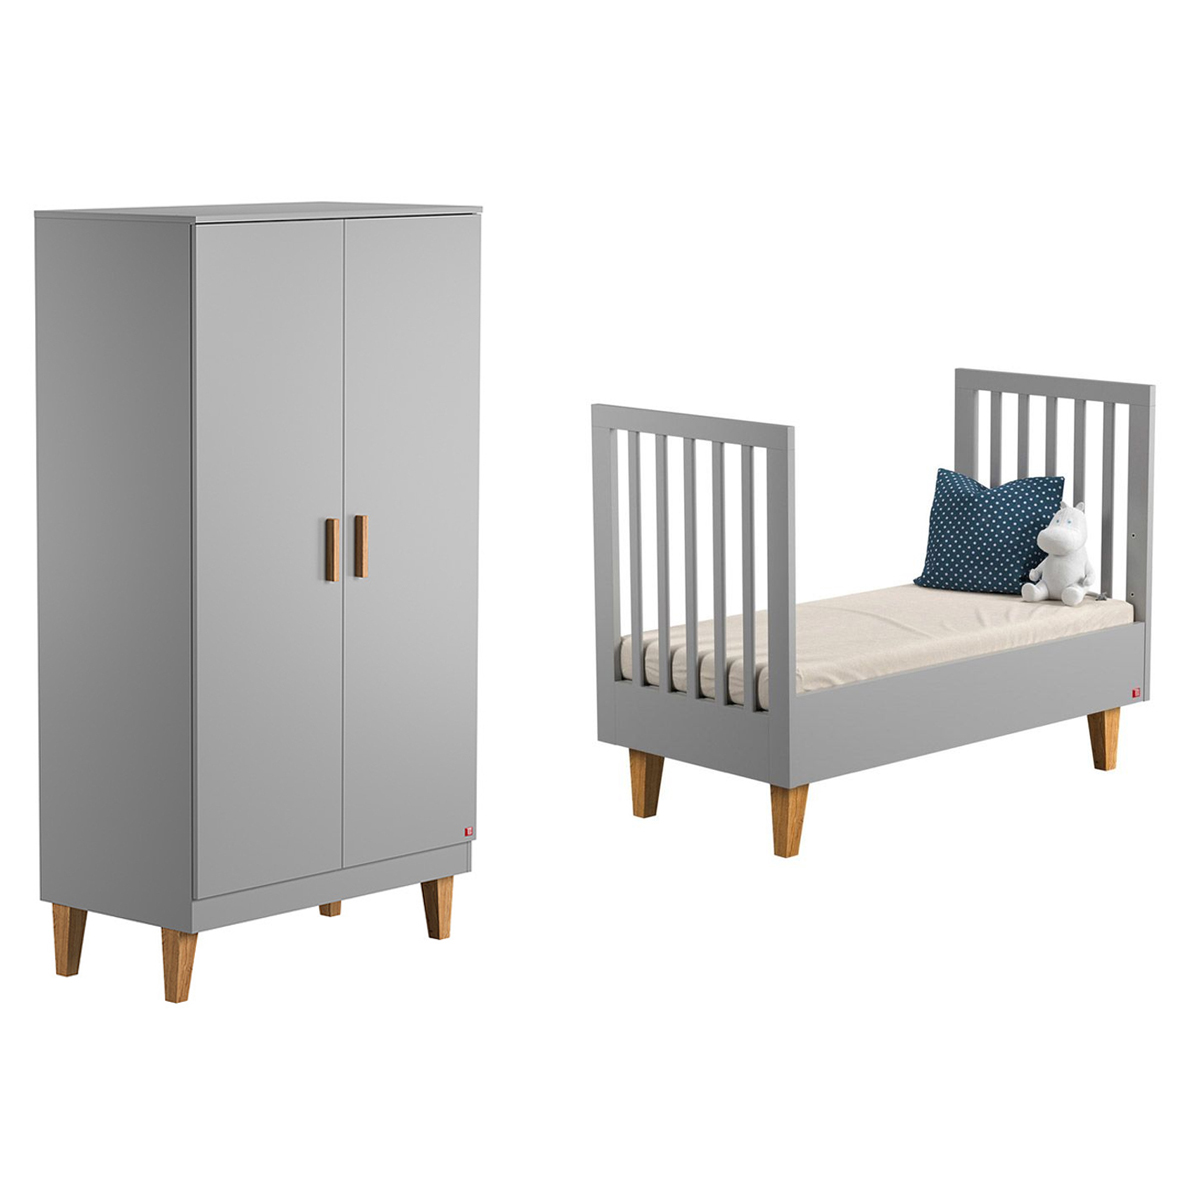 vox_lounge_grey_pack_armoire_lit_ouvert